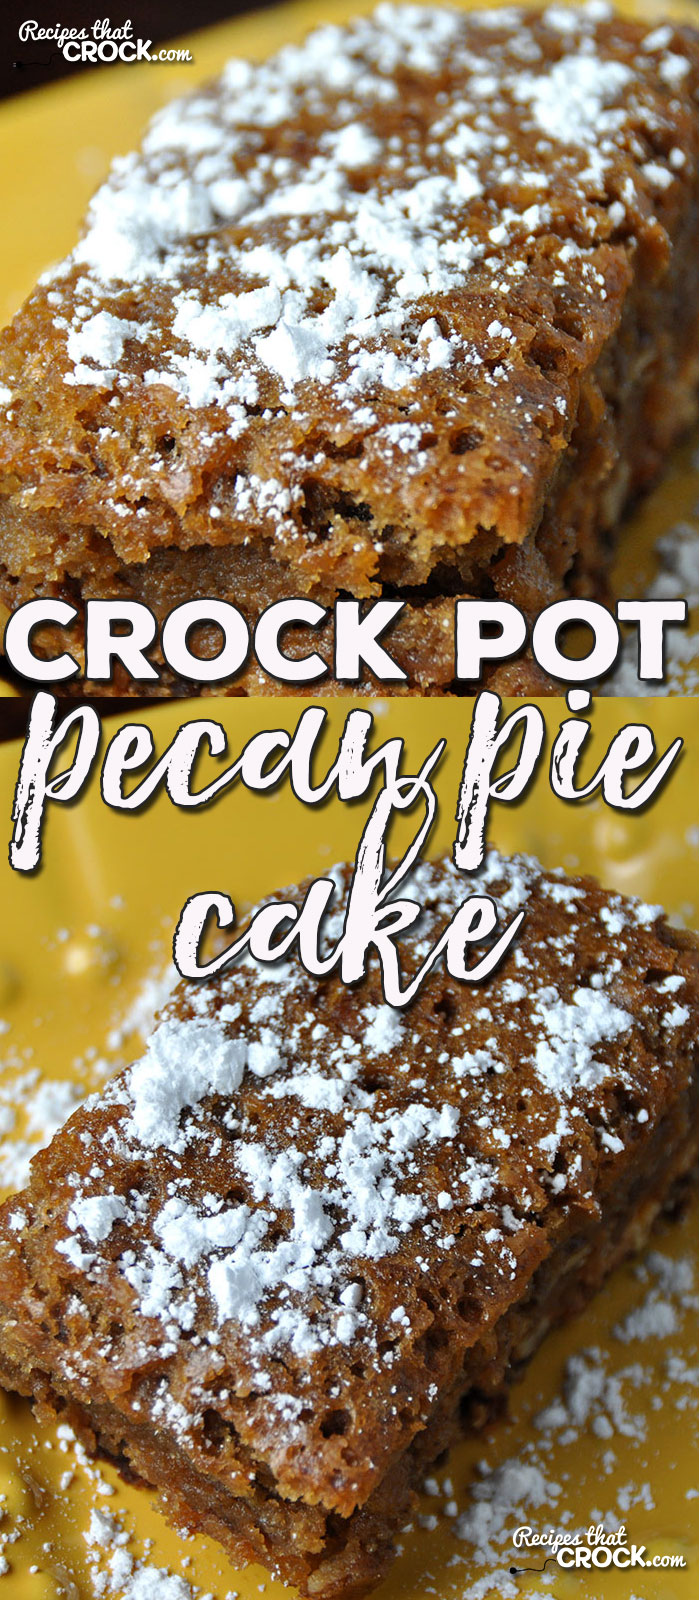 This Crock Pot Pecan Pie Cake is so delicious! It is the perfect dessert to take to your next party, pitch-in or potluck! Everyone will be glad you did!